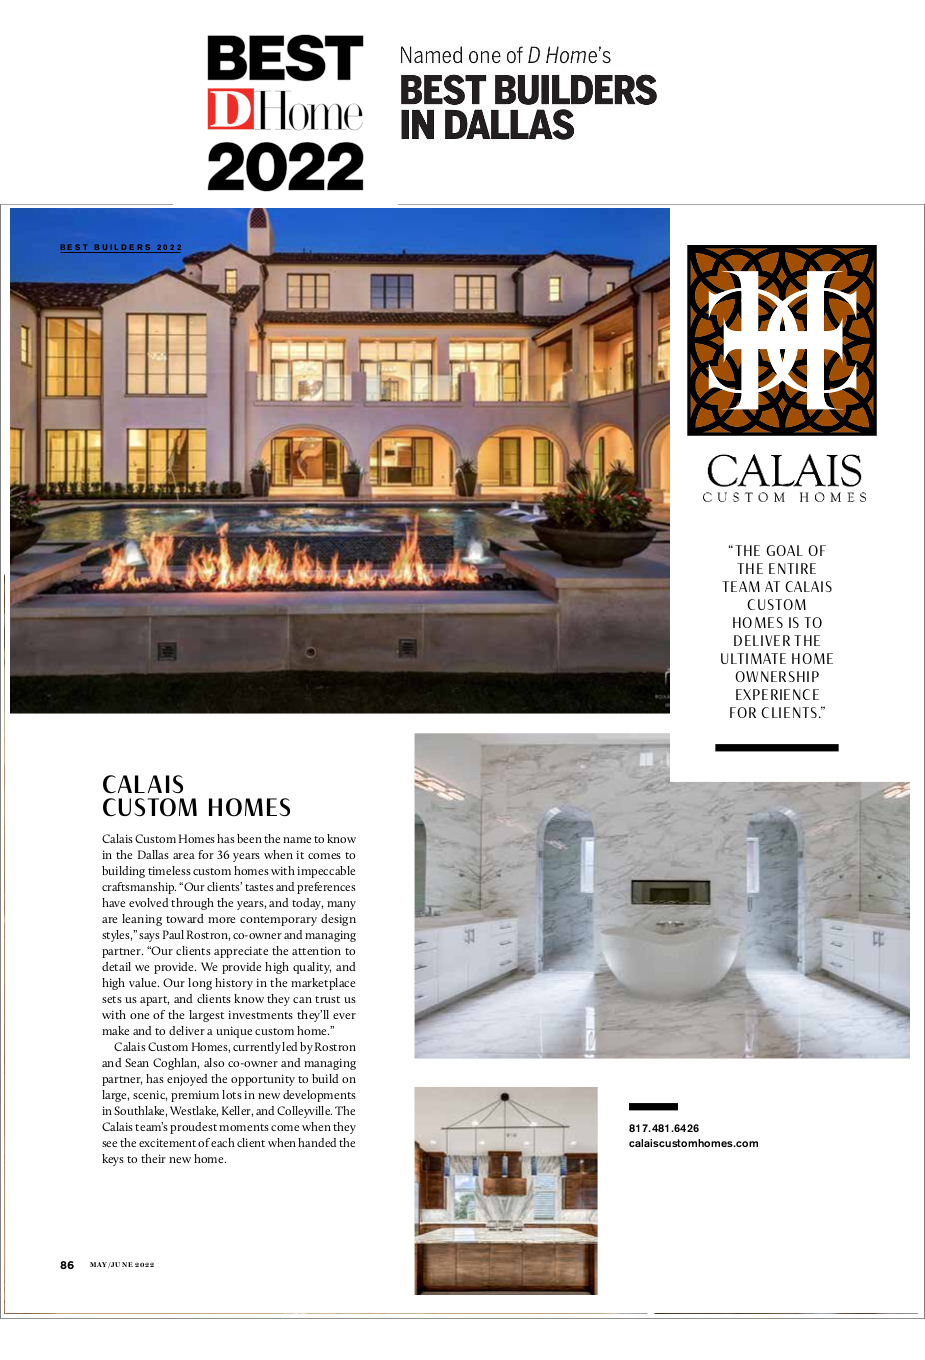 2022 DHome Best Builder Award Article